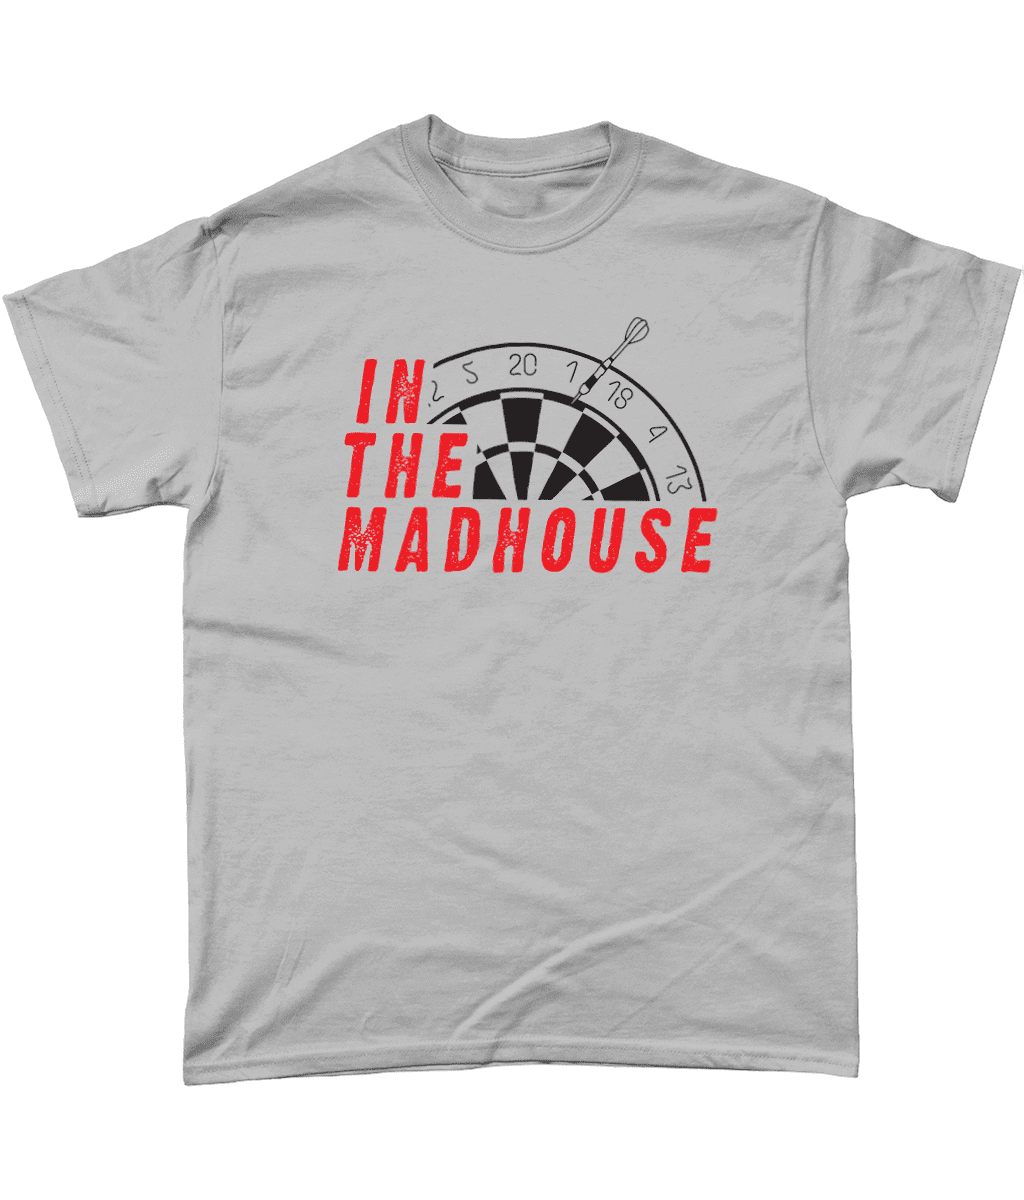 In the Madhouse Darts Men's T Shirt Sports Grey